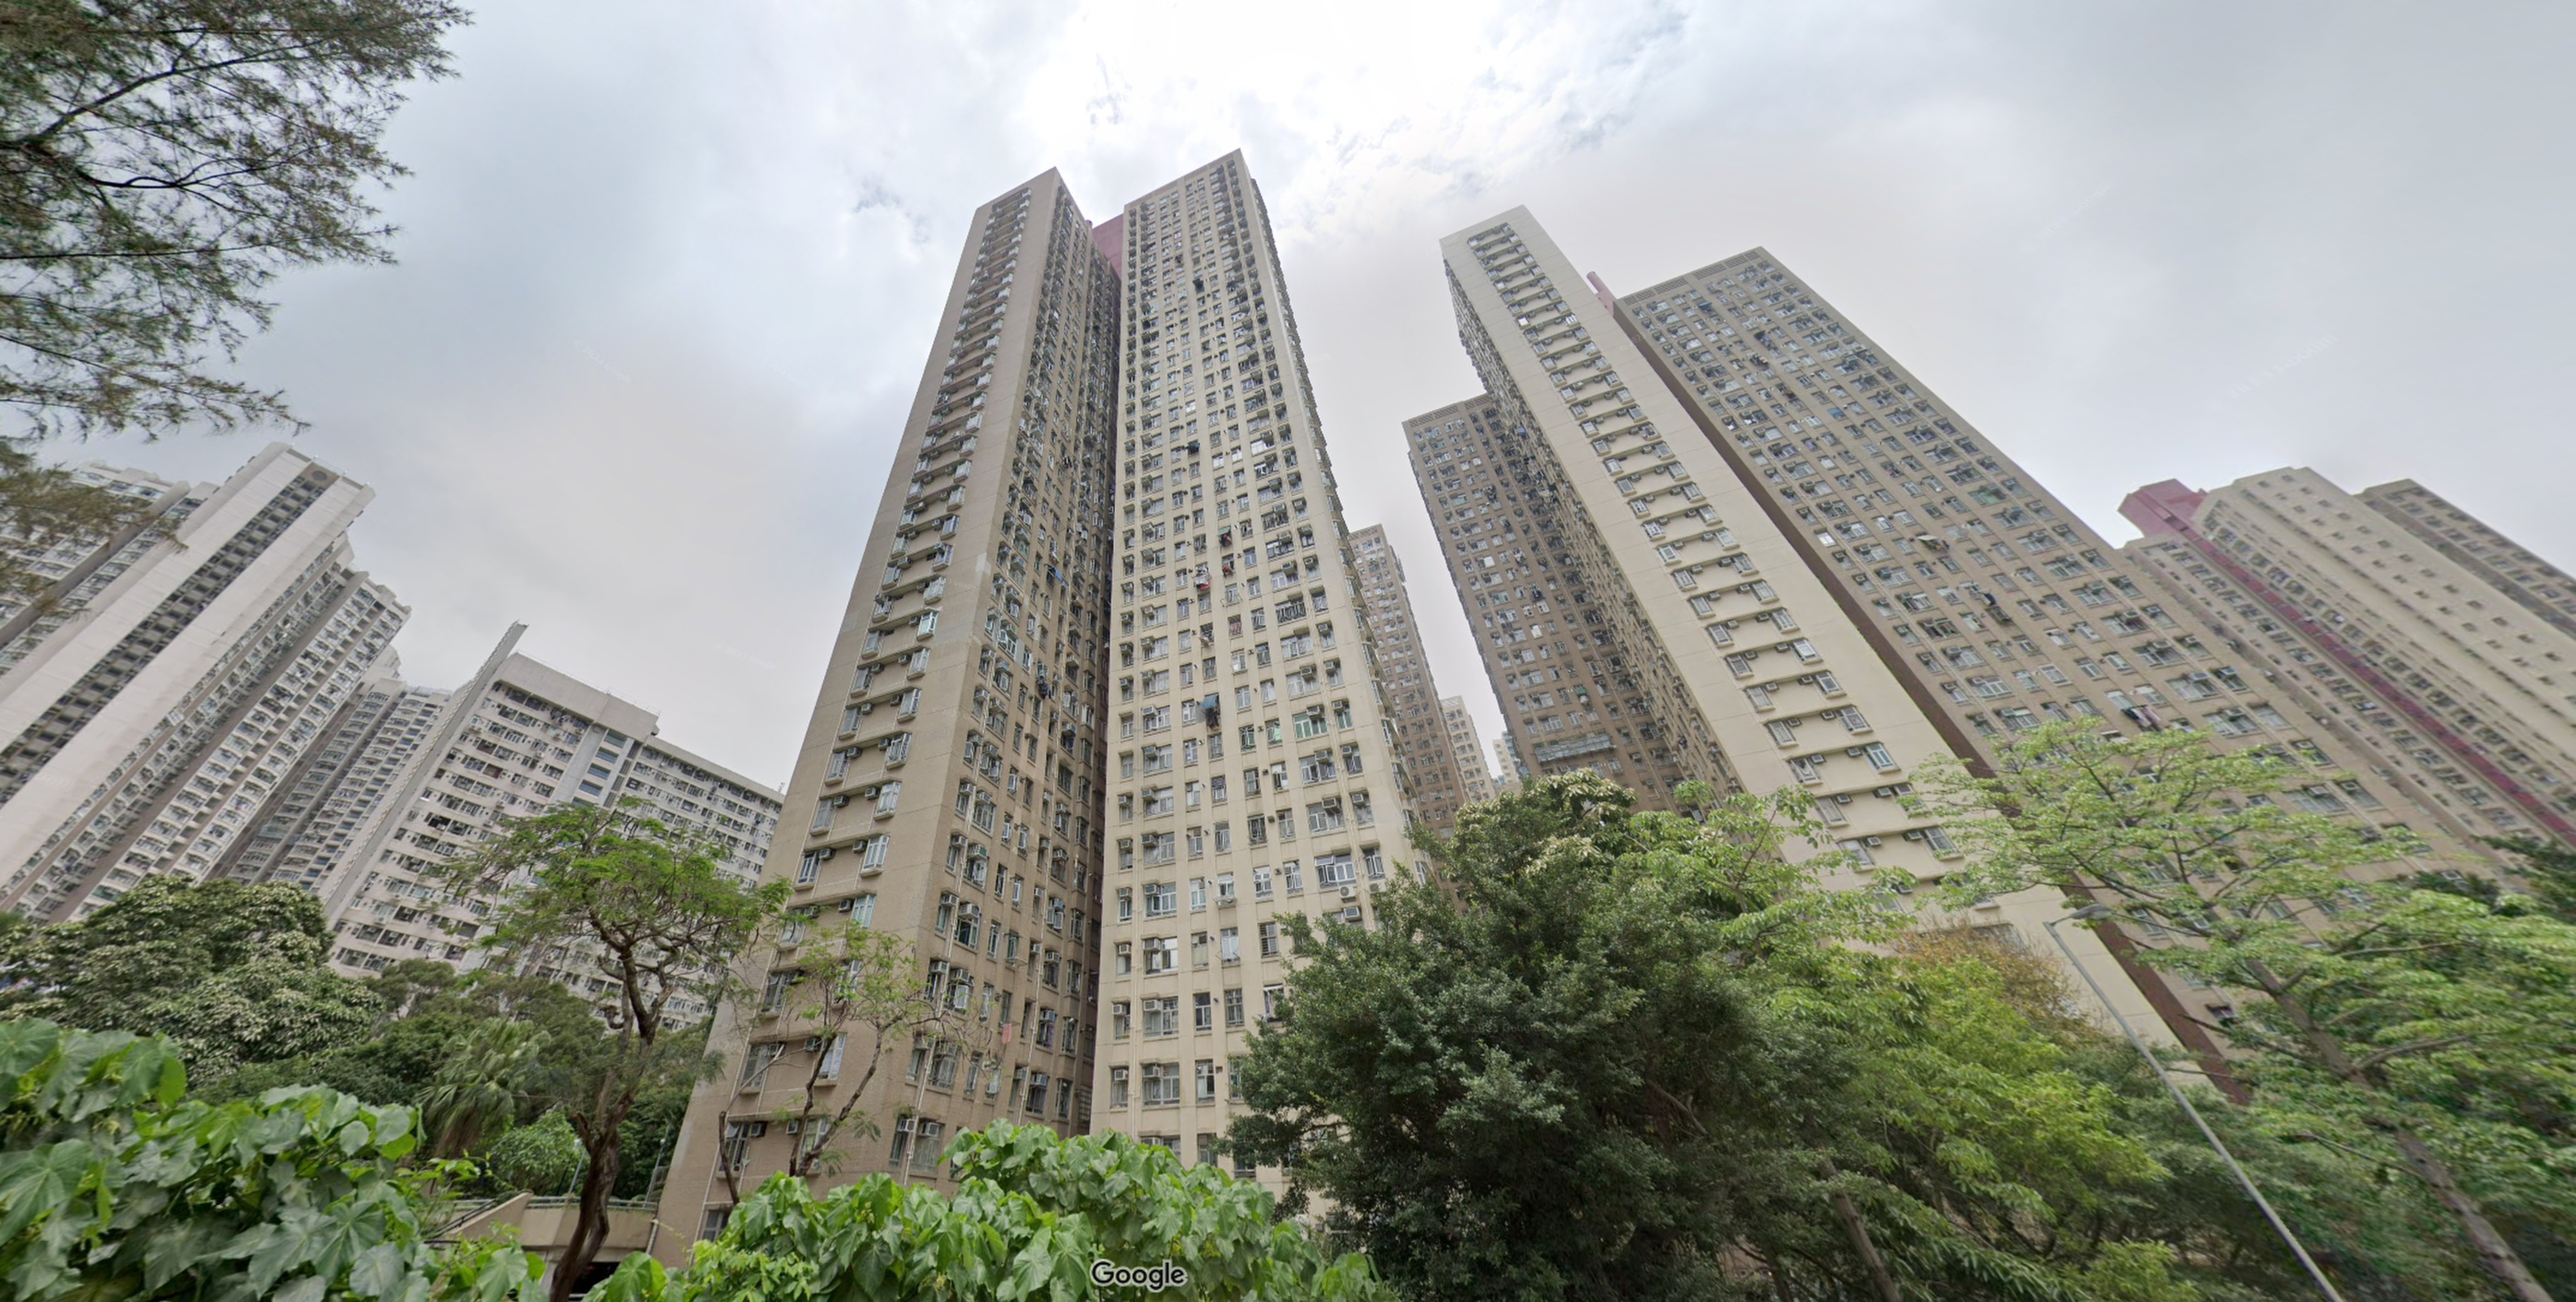 Lung Poon Court in Wong Tai Sin, where the domestic disturbance occurred. Photo: Google